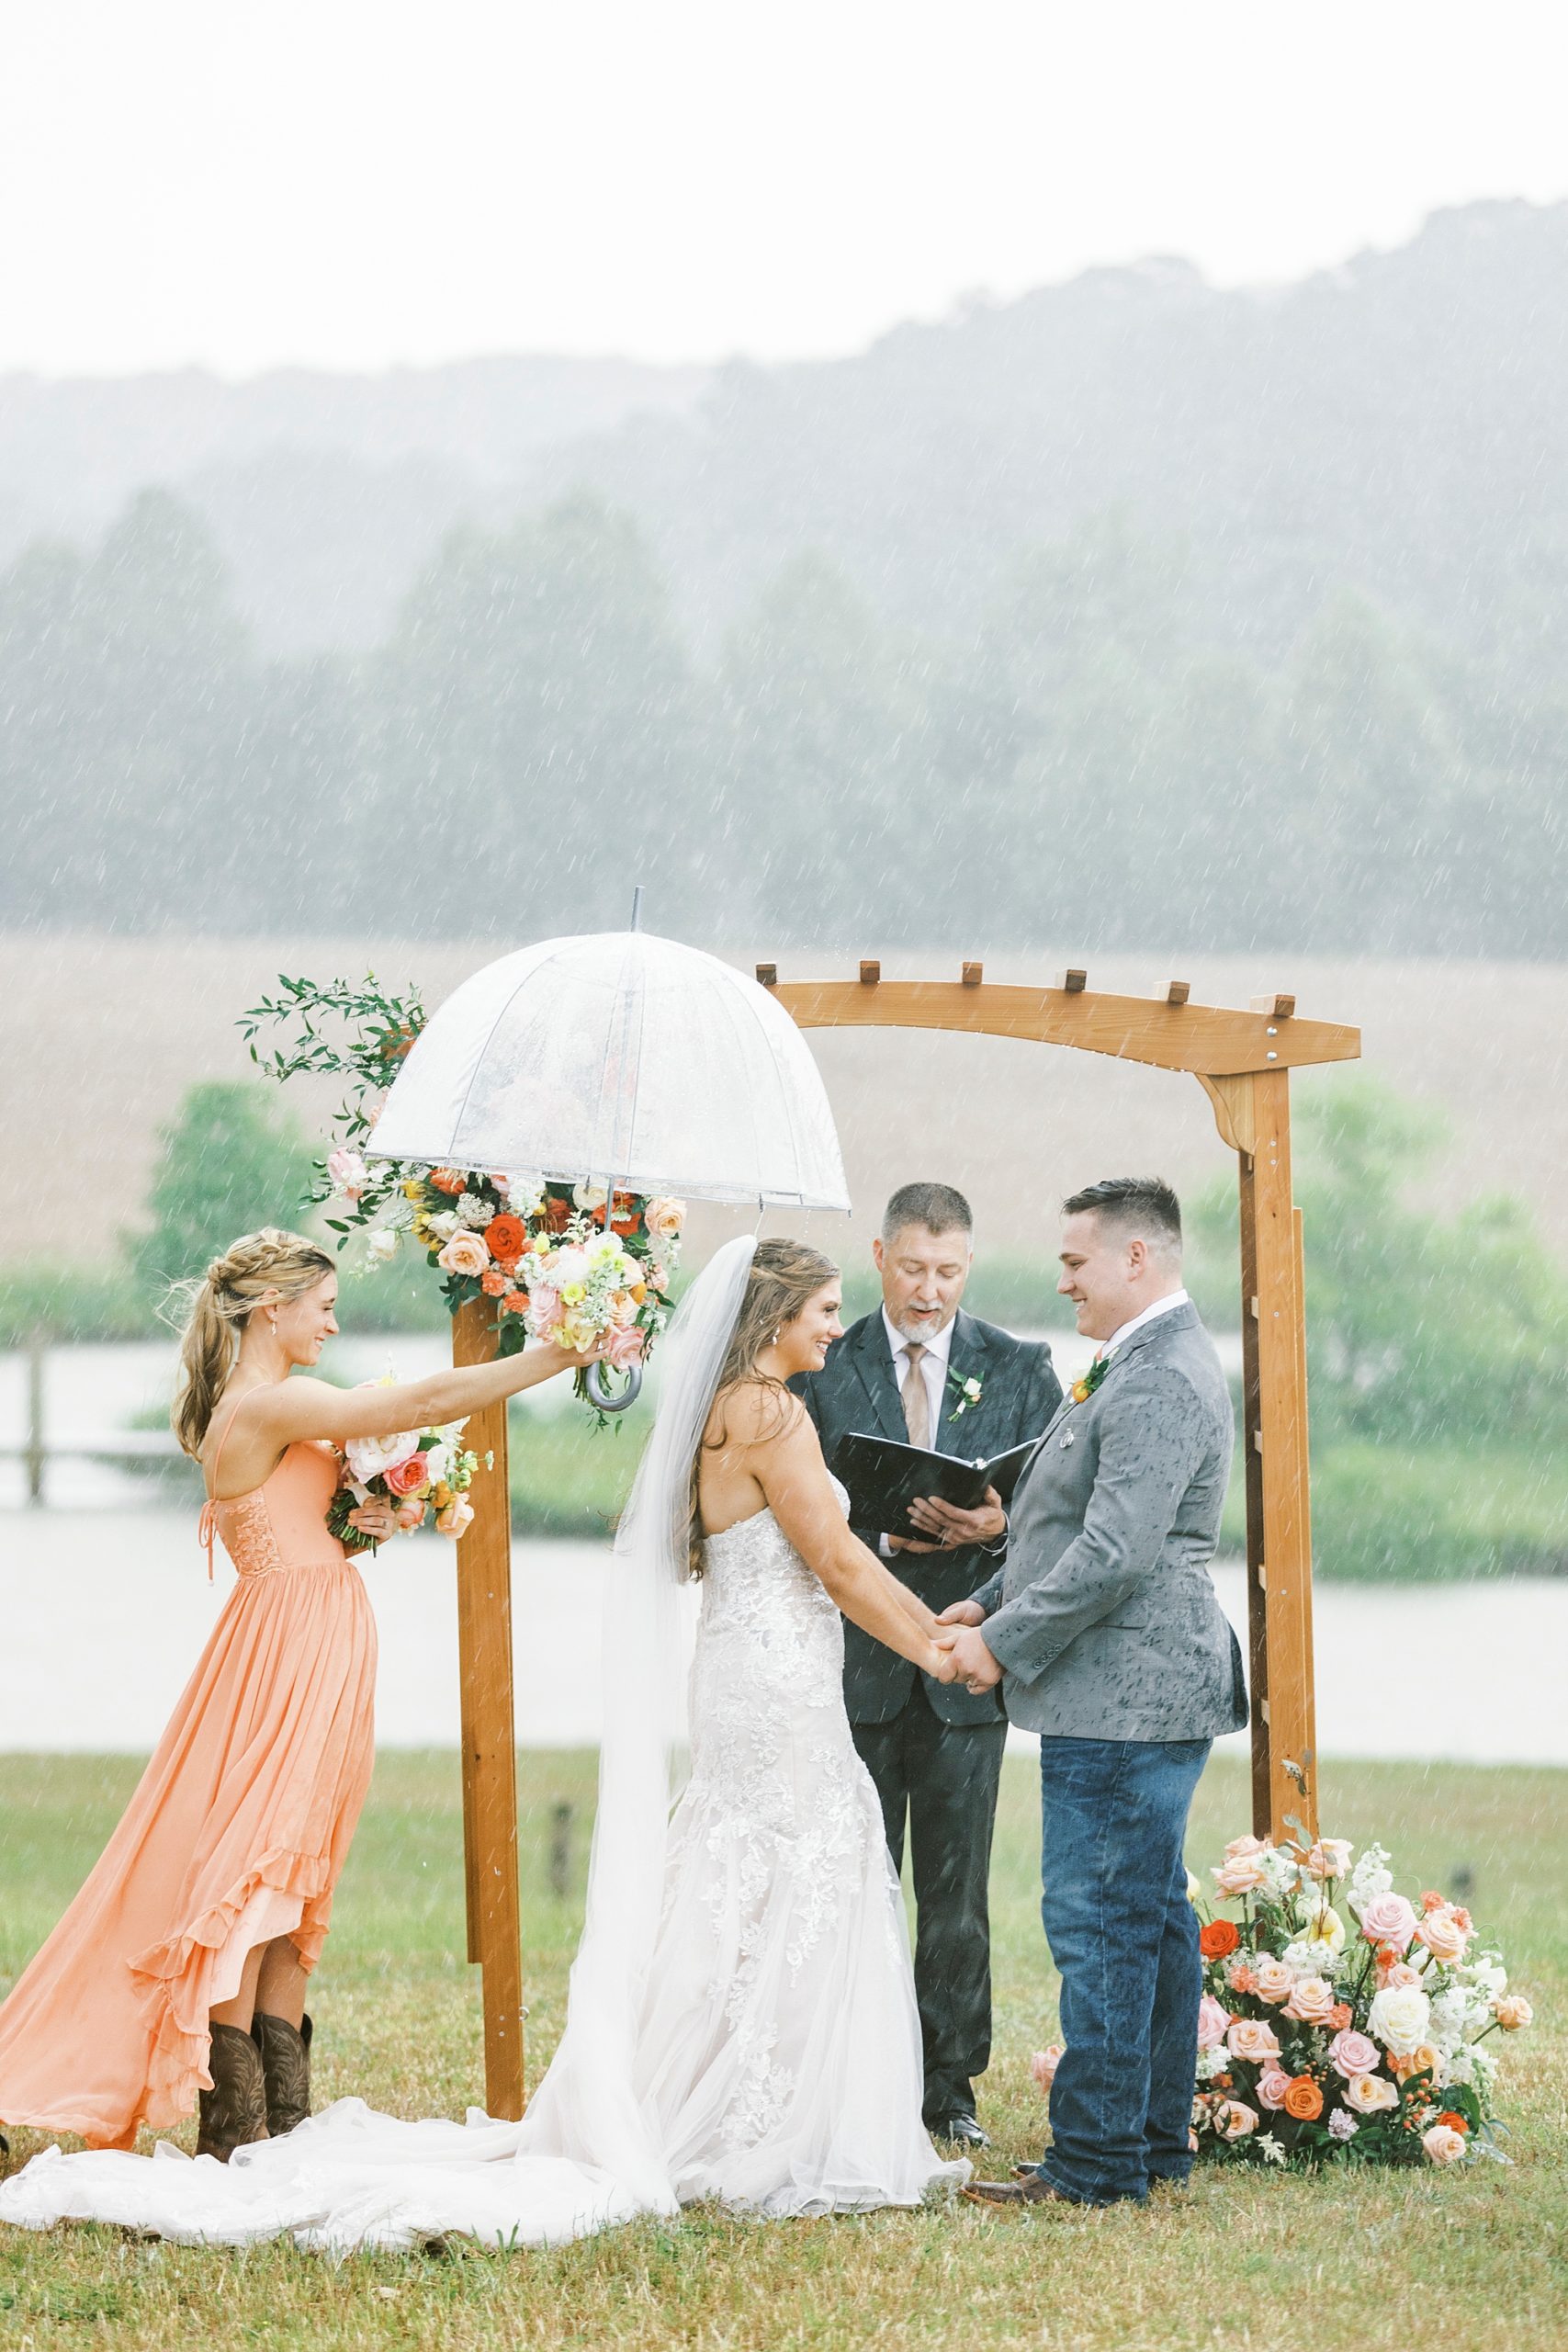 bridesmaid holds umbrella over bride during rainy wedding ceremony at The Stable at Riverview